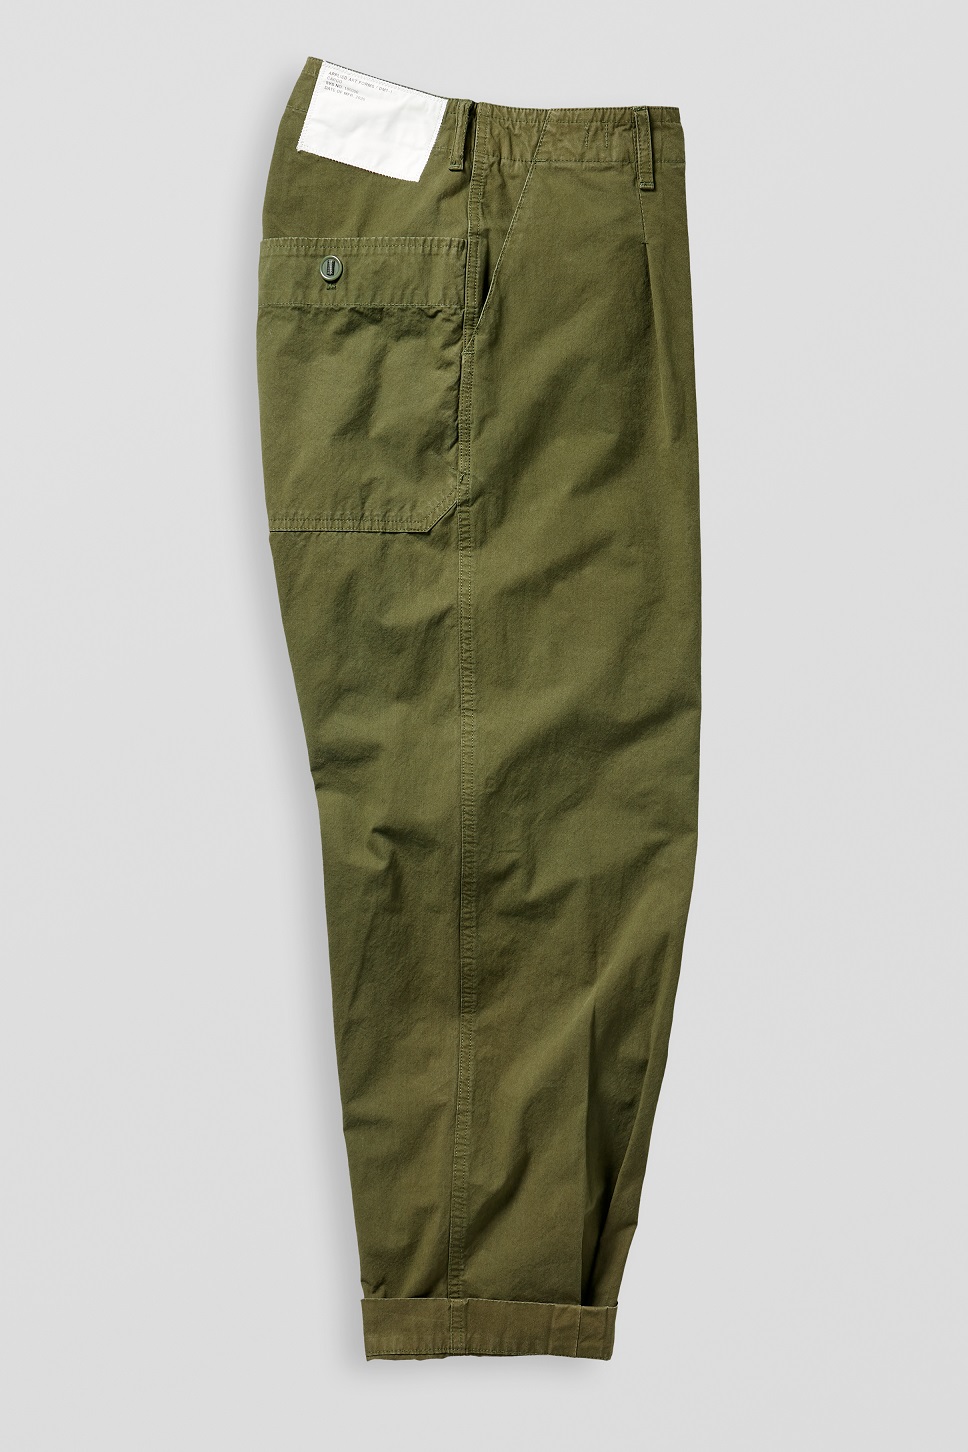 APPLIED ART FORMS Japanese Cargo Pant in Military Green S